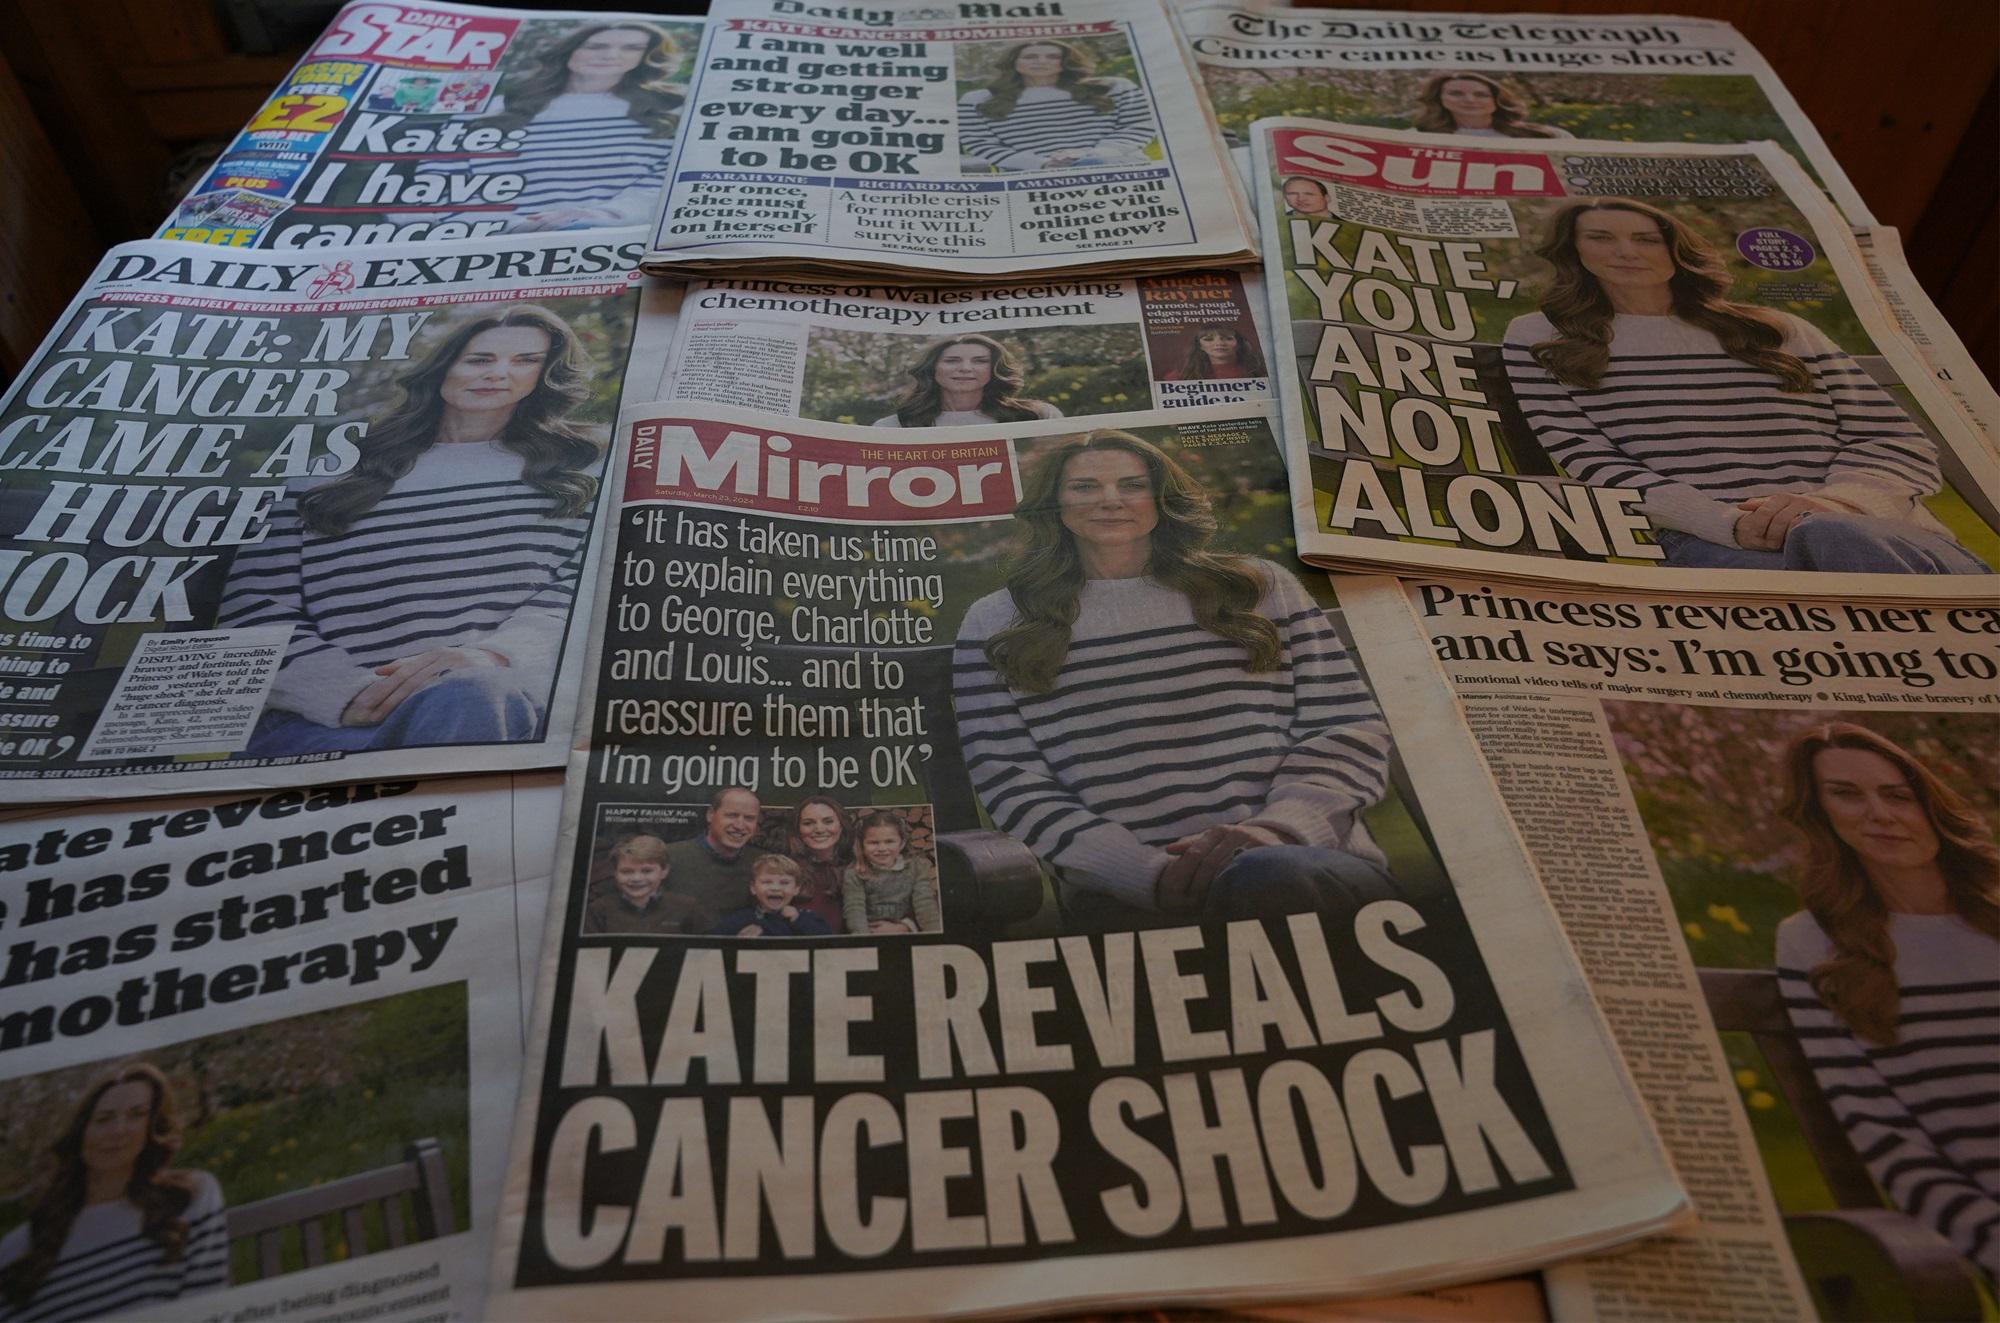 The neverending conspiracy theories surrounding Kate Middleton and cancer